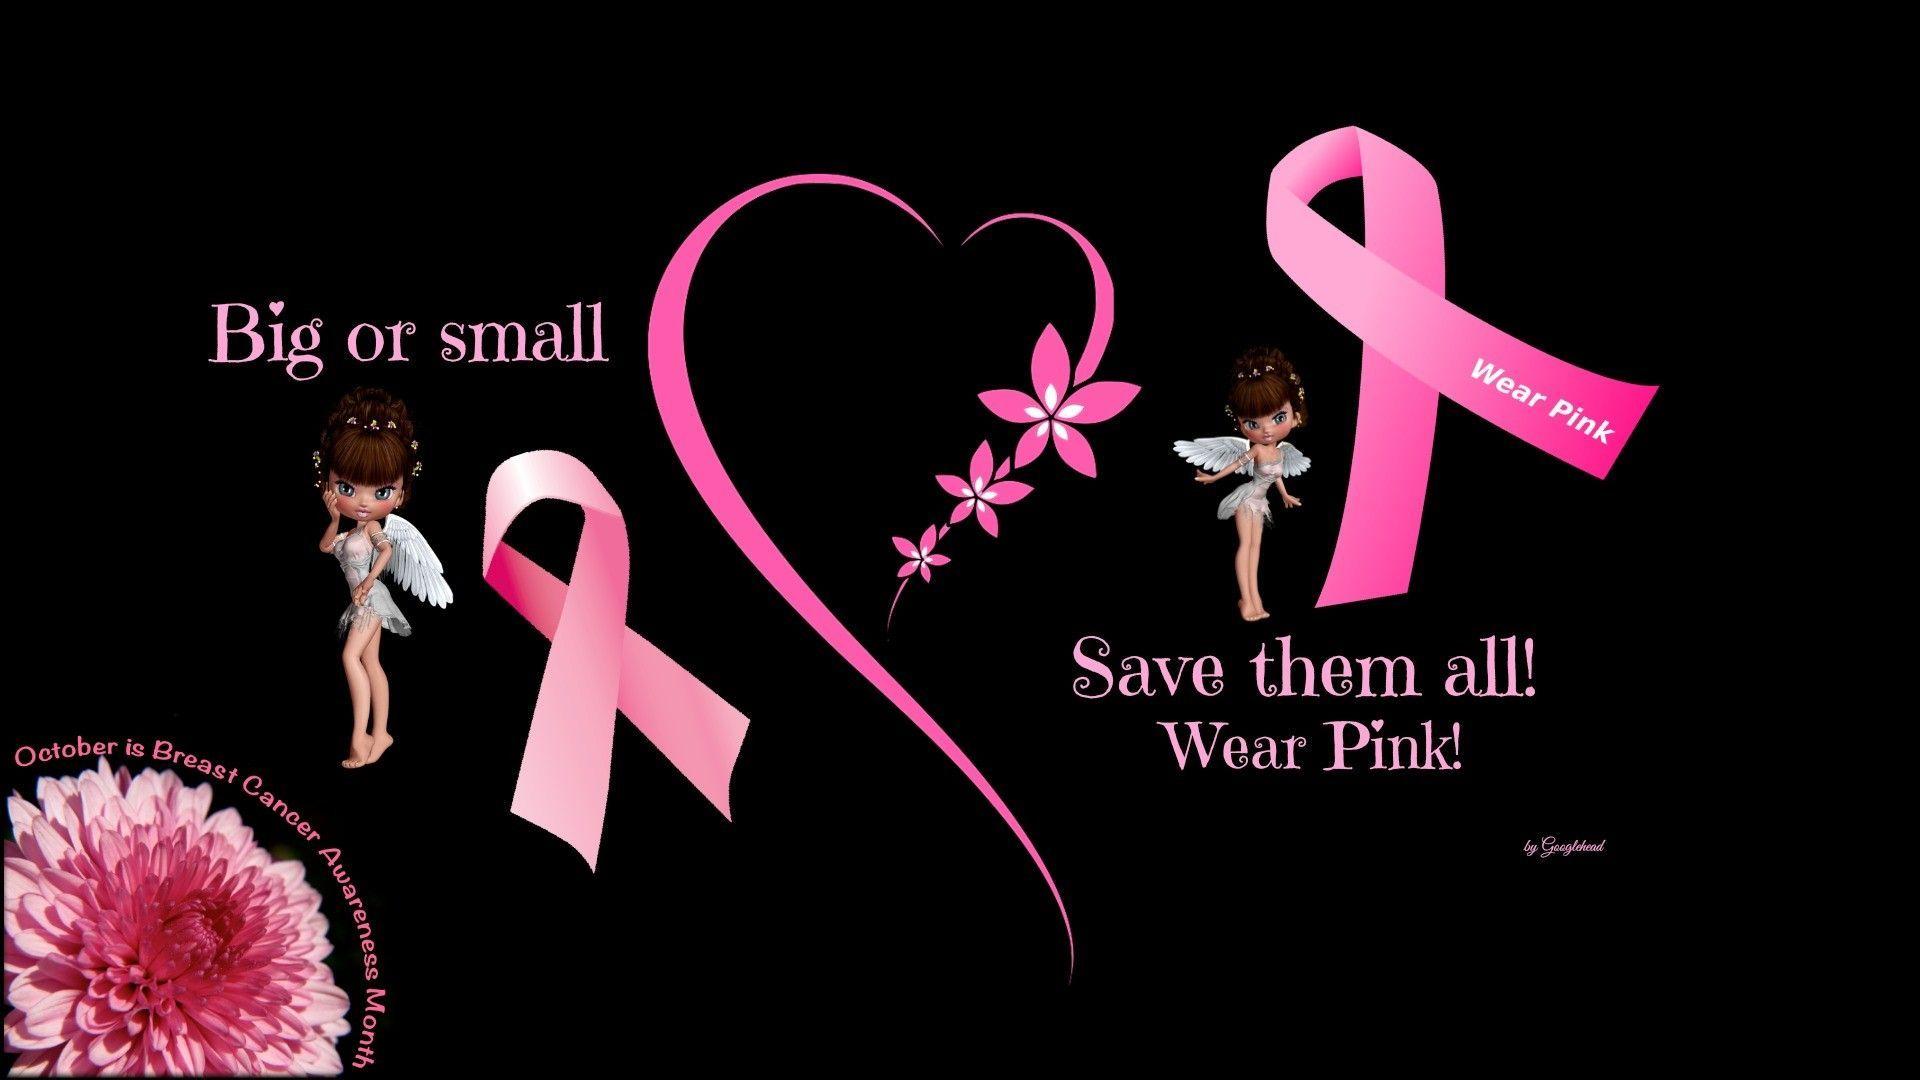 HD wallpaper pink ribbon breast cancer awareness month prevention  health  Wallpaper Flare